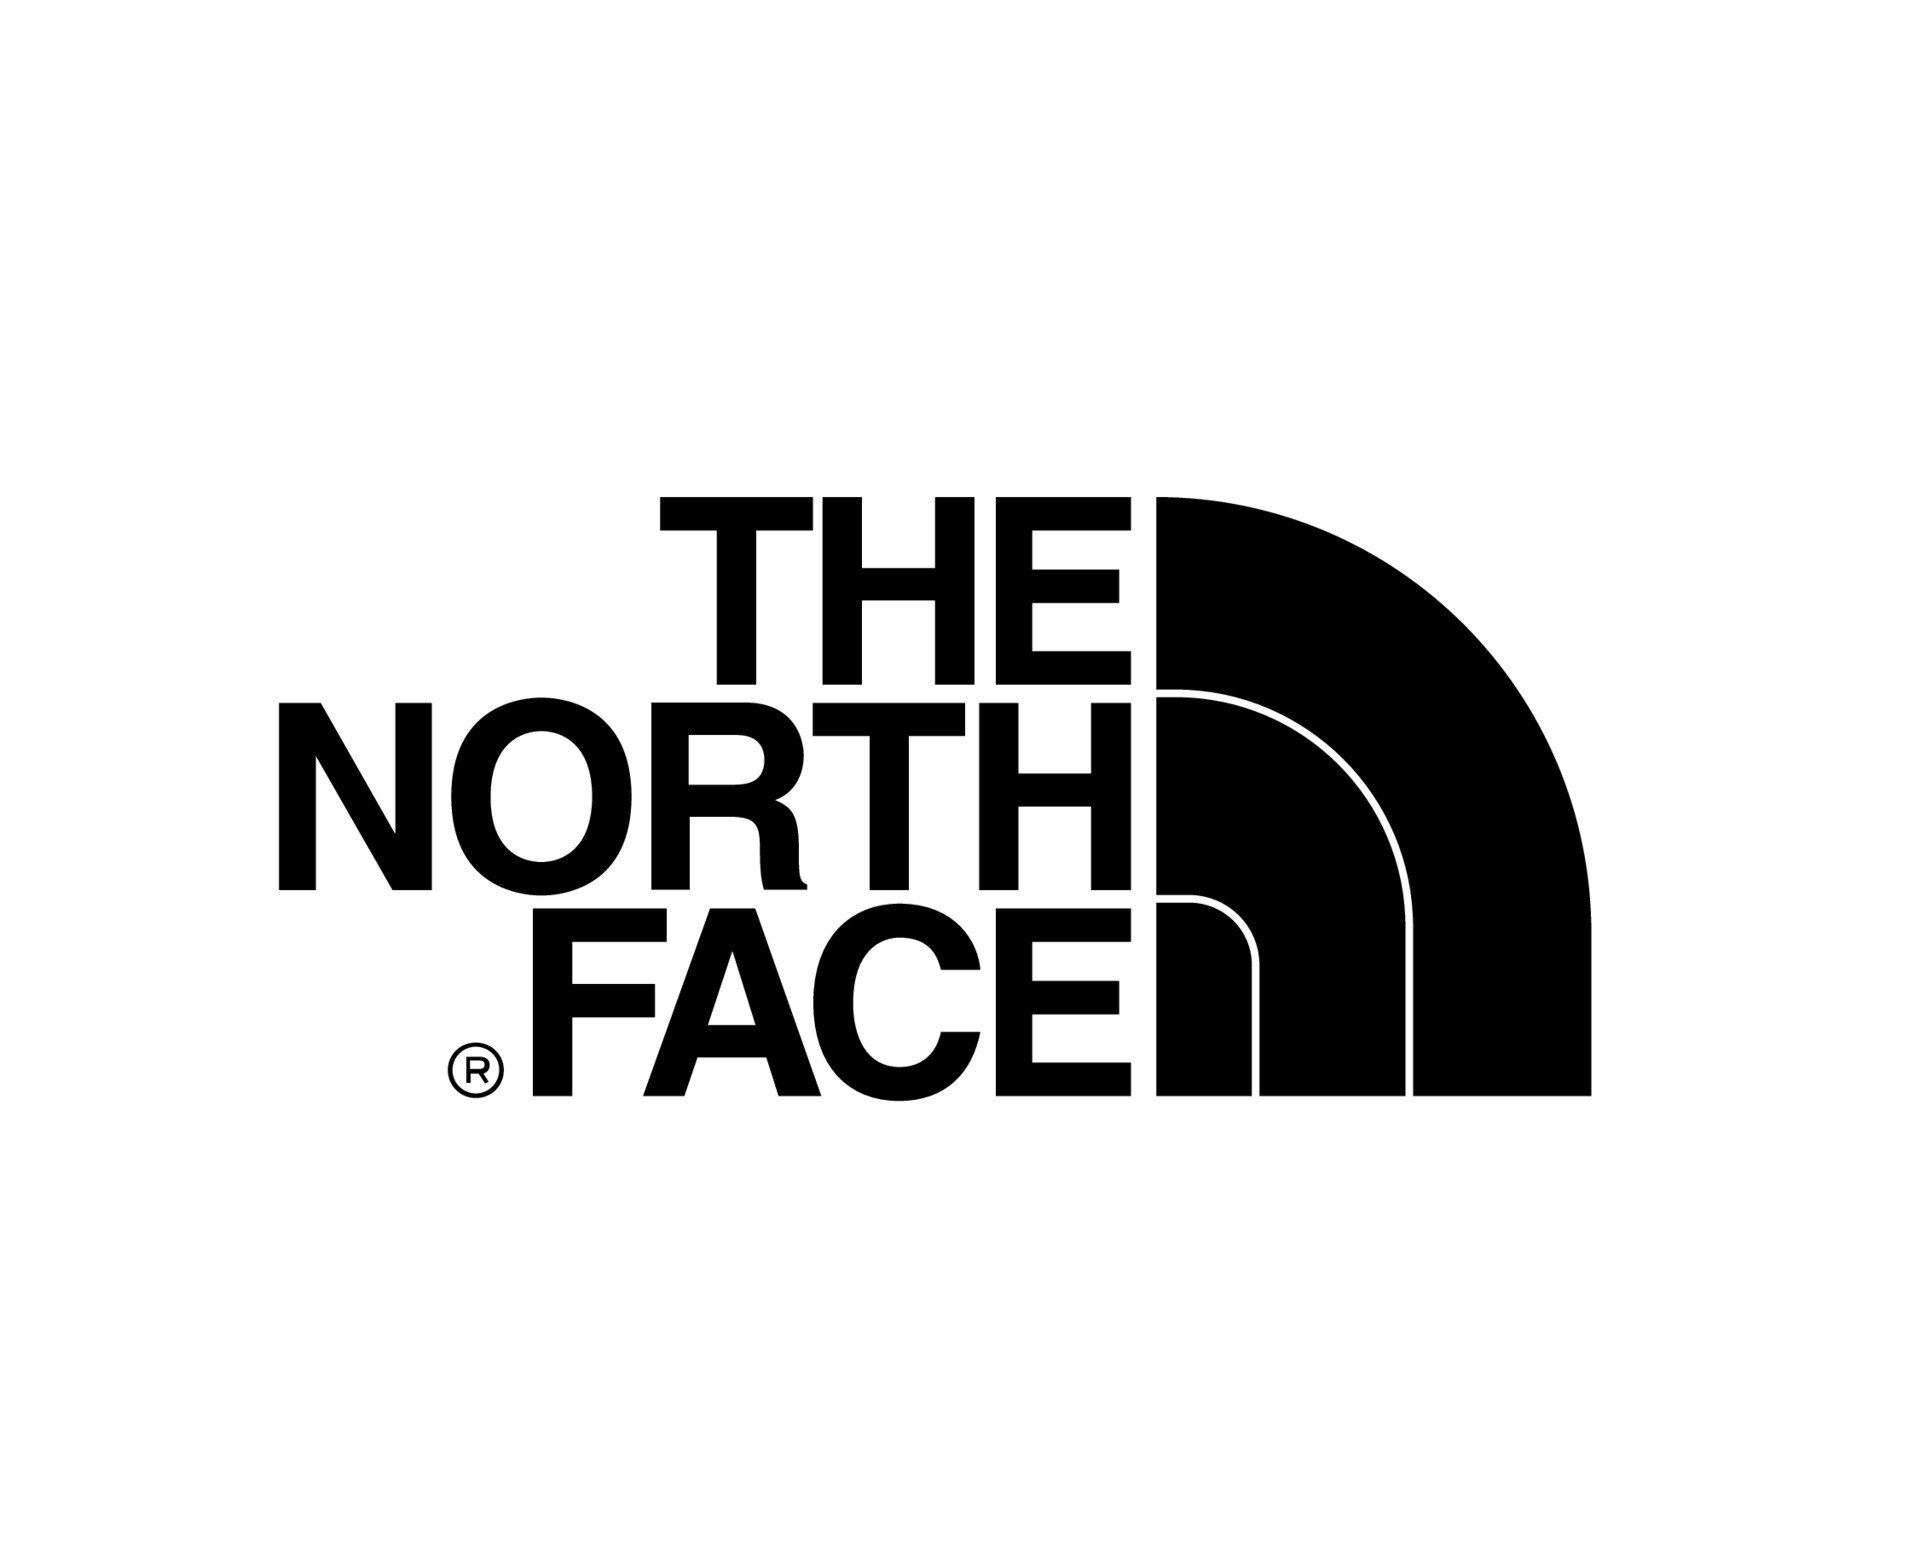 the-north-face-brand-logo-black-symbol-clothes-design-icon-abstract-illustration-free-vector.jpg